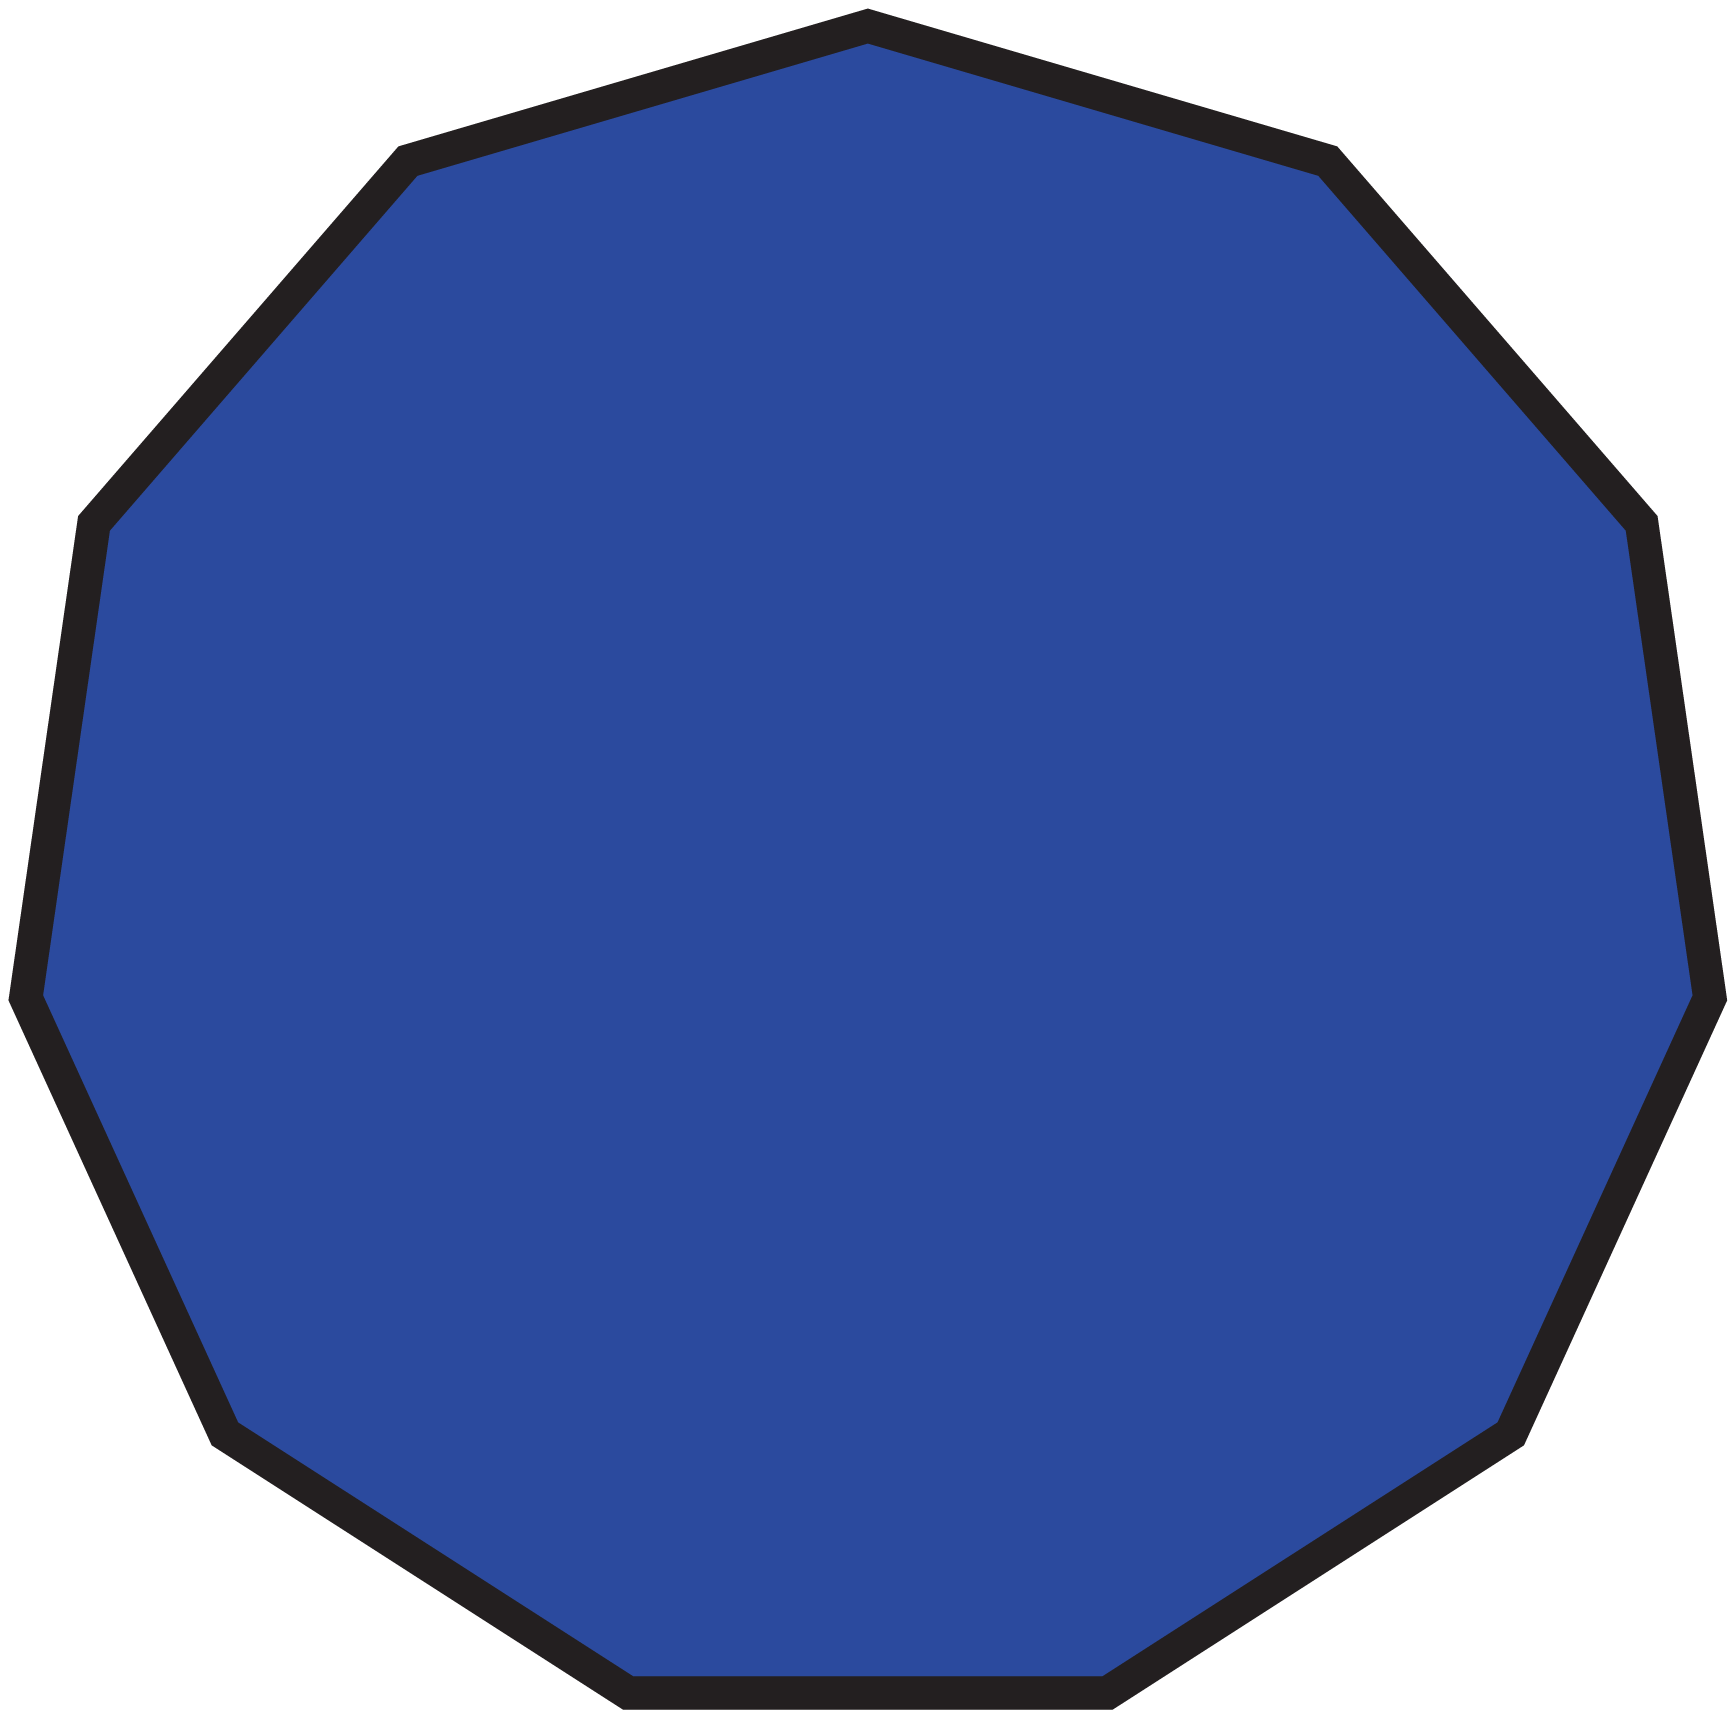 “Learned a new word today - Hendecagon, an eleven sided 2D shape.” 